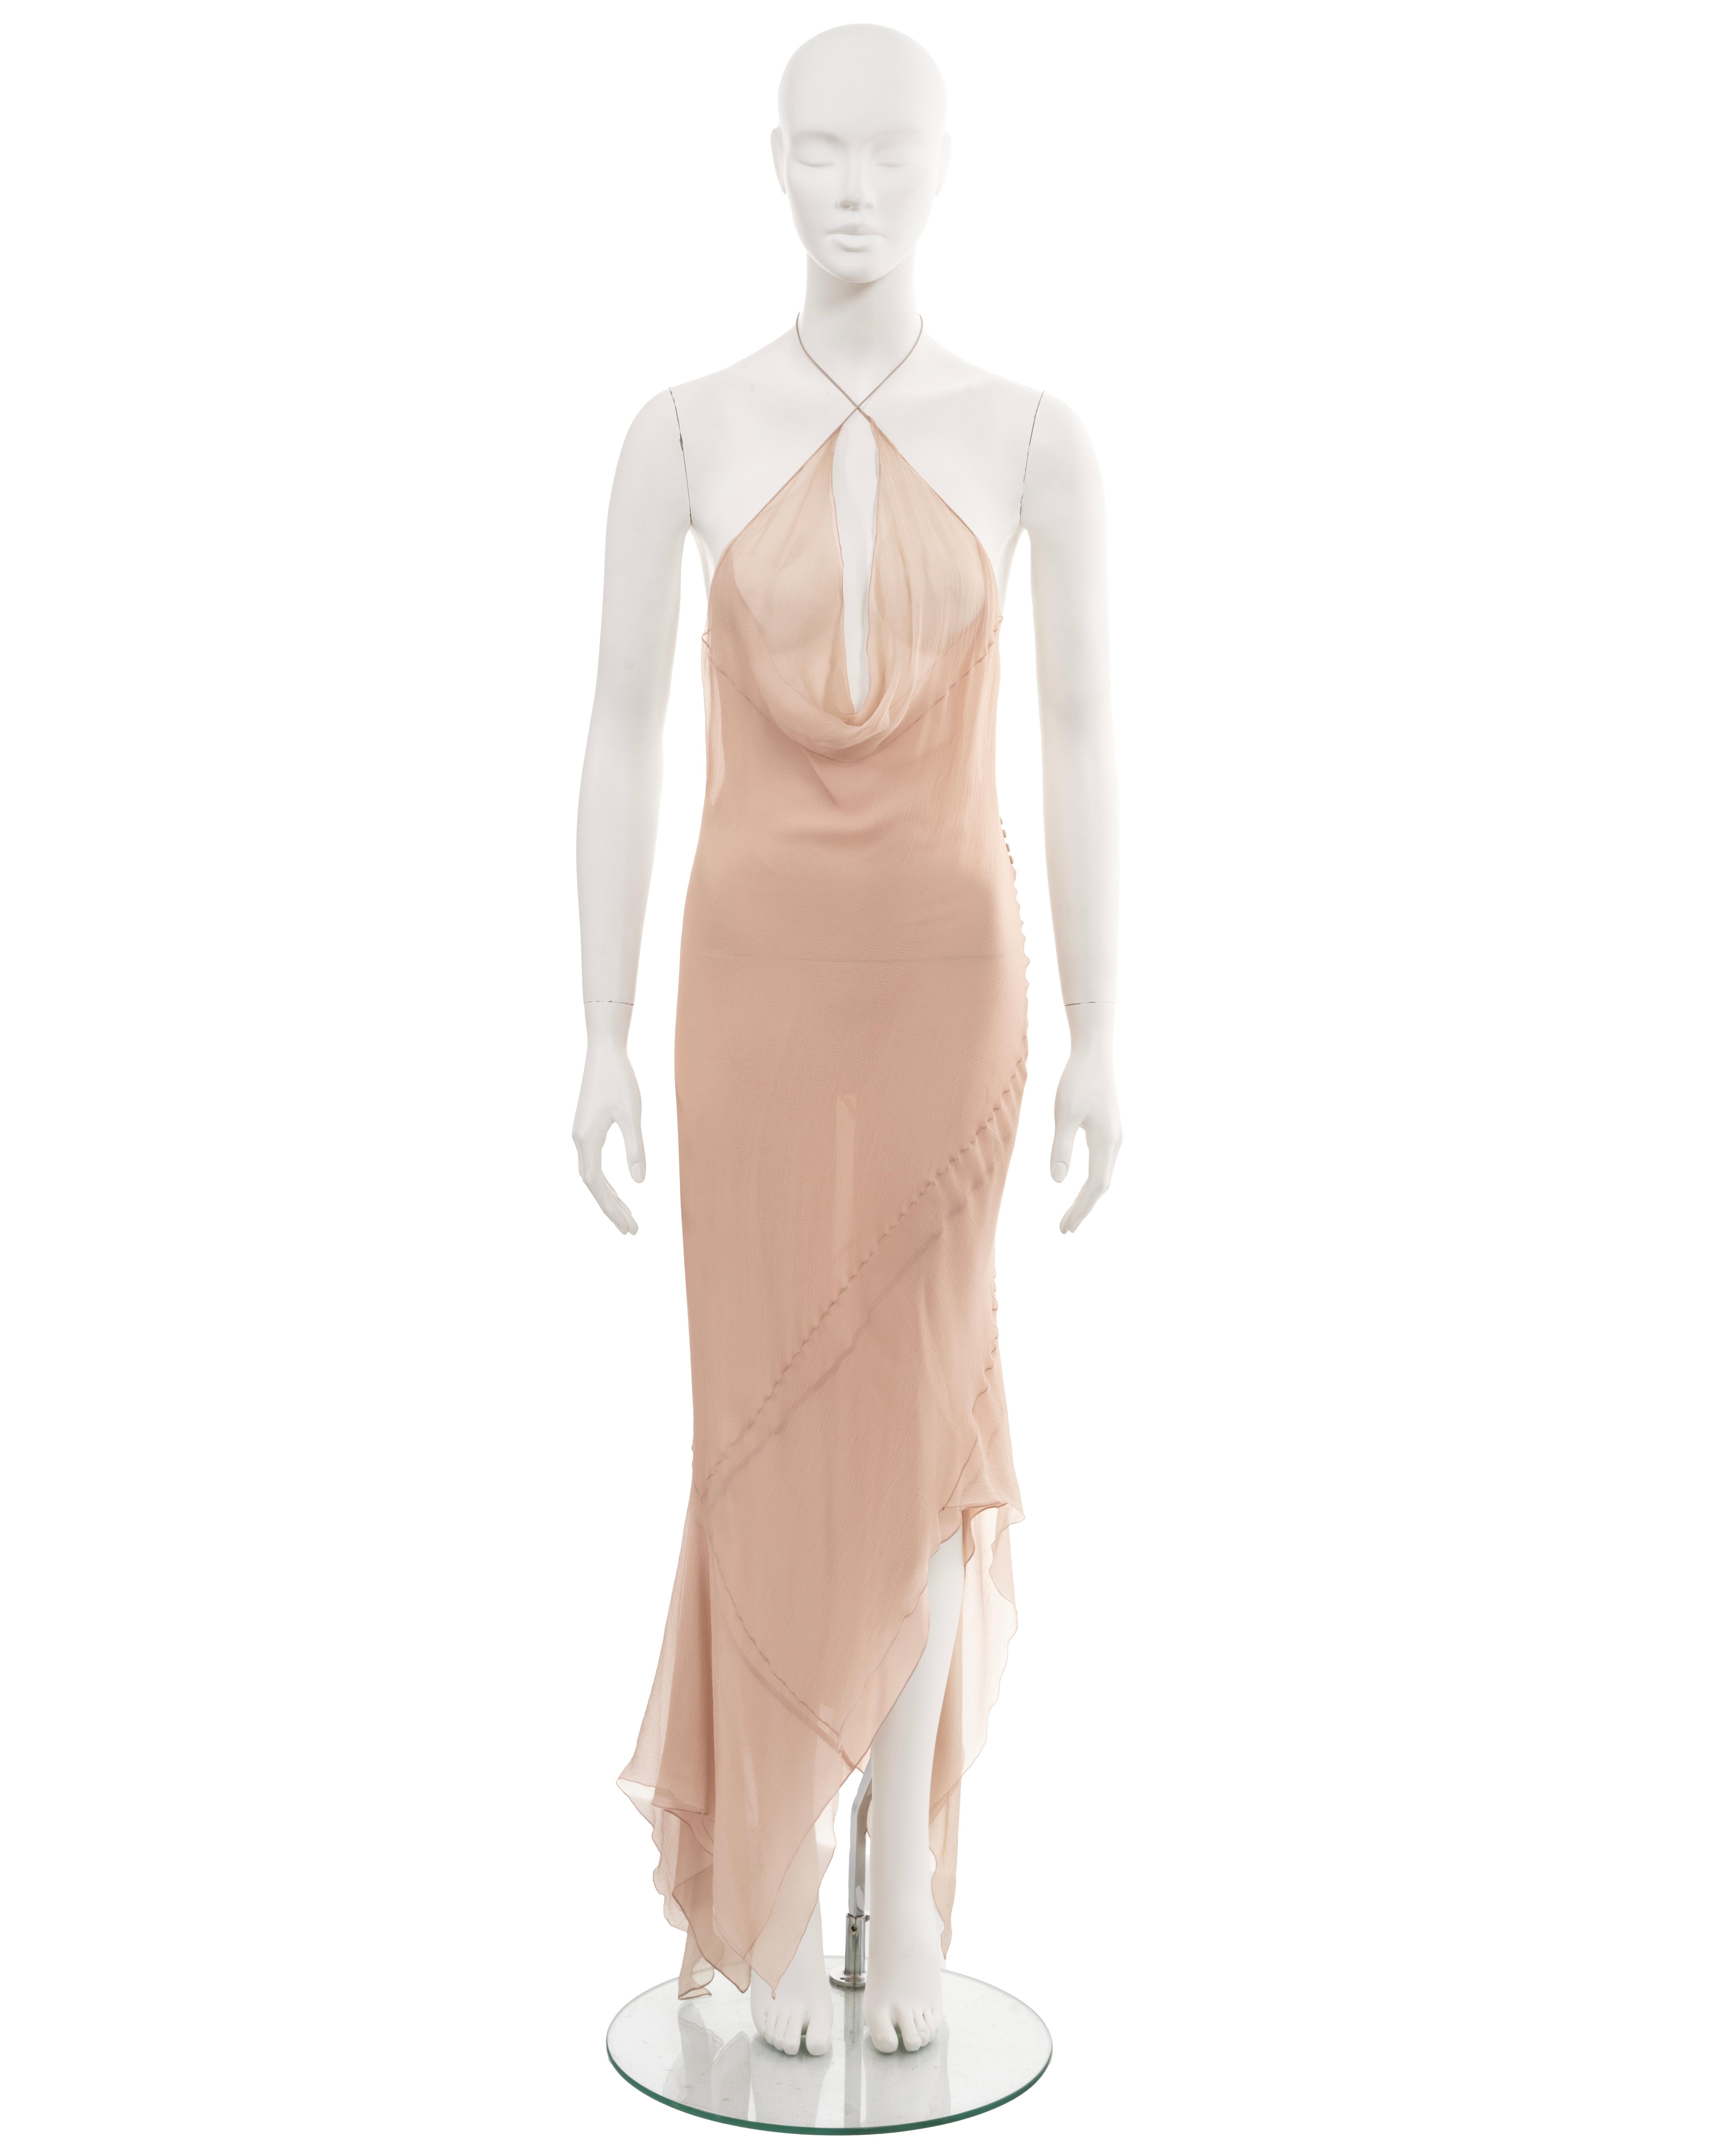 ▪ John Galliano evening dress
▪ Fall-Winter 1997
▪ Sold by One of a Kind Archive
▪ Double-layered pale pink bias-cut silk chiffon 
▪ 2 string halterneck ties 
▪ Plunging cowl neck
▪ Low back
▪ Asymmetric hemline 
▪ Size approx. Medium 

All